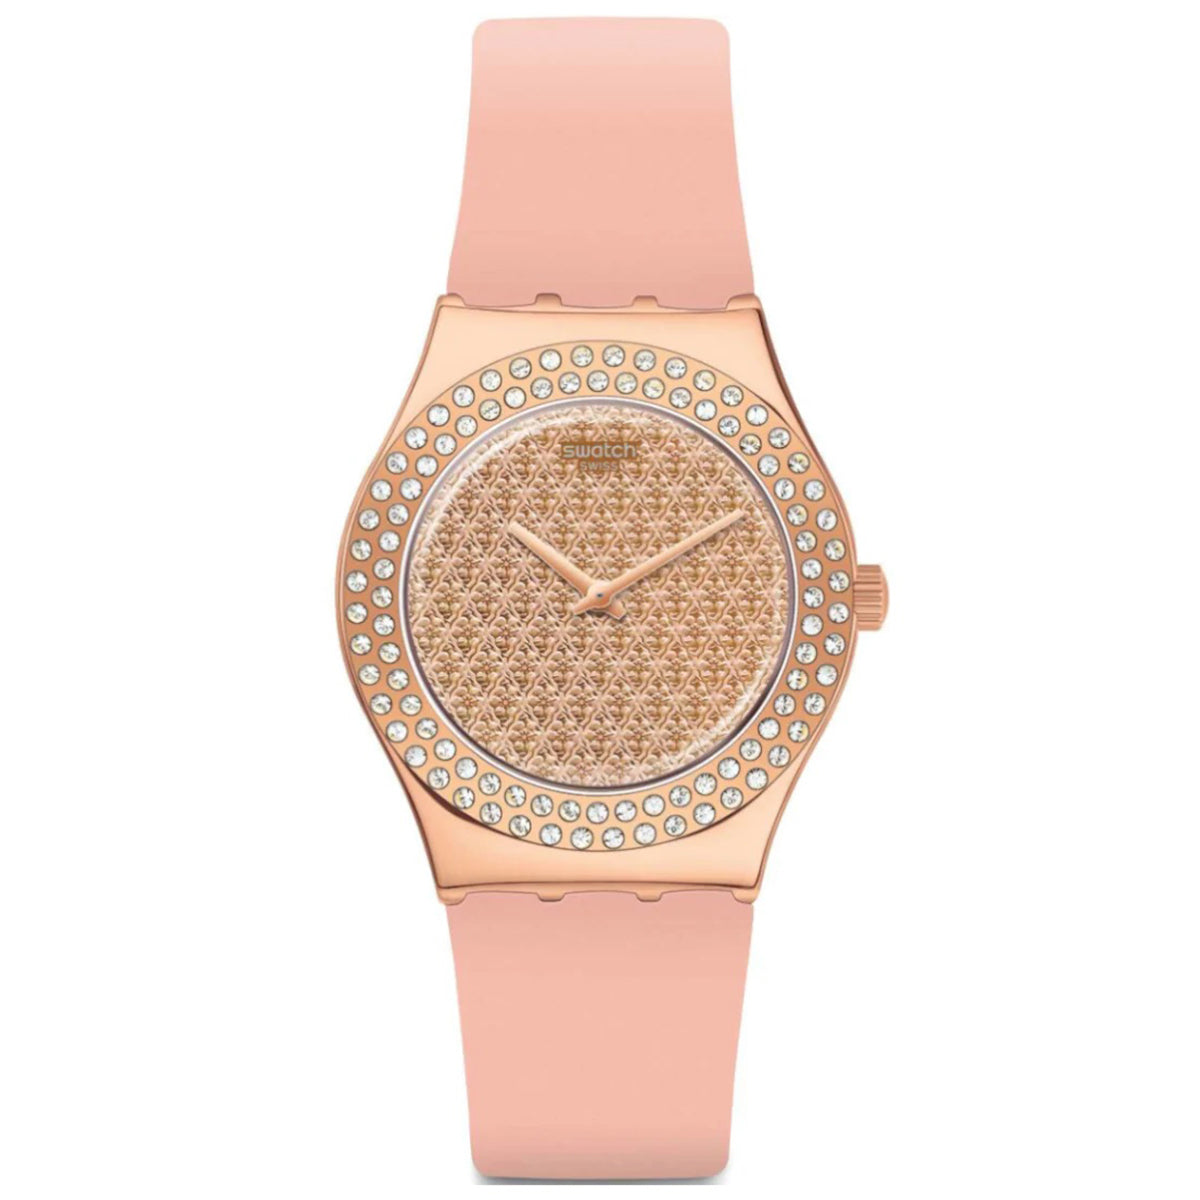 Swatch - Pink Confusion - YLG140